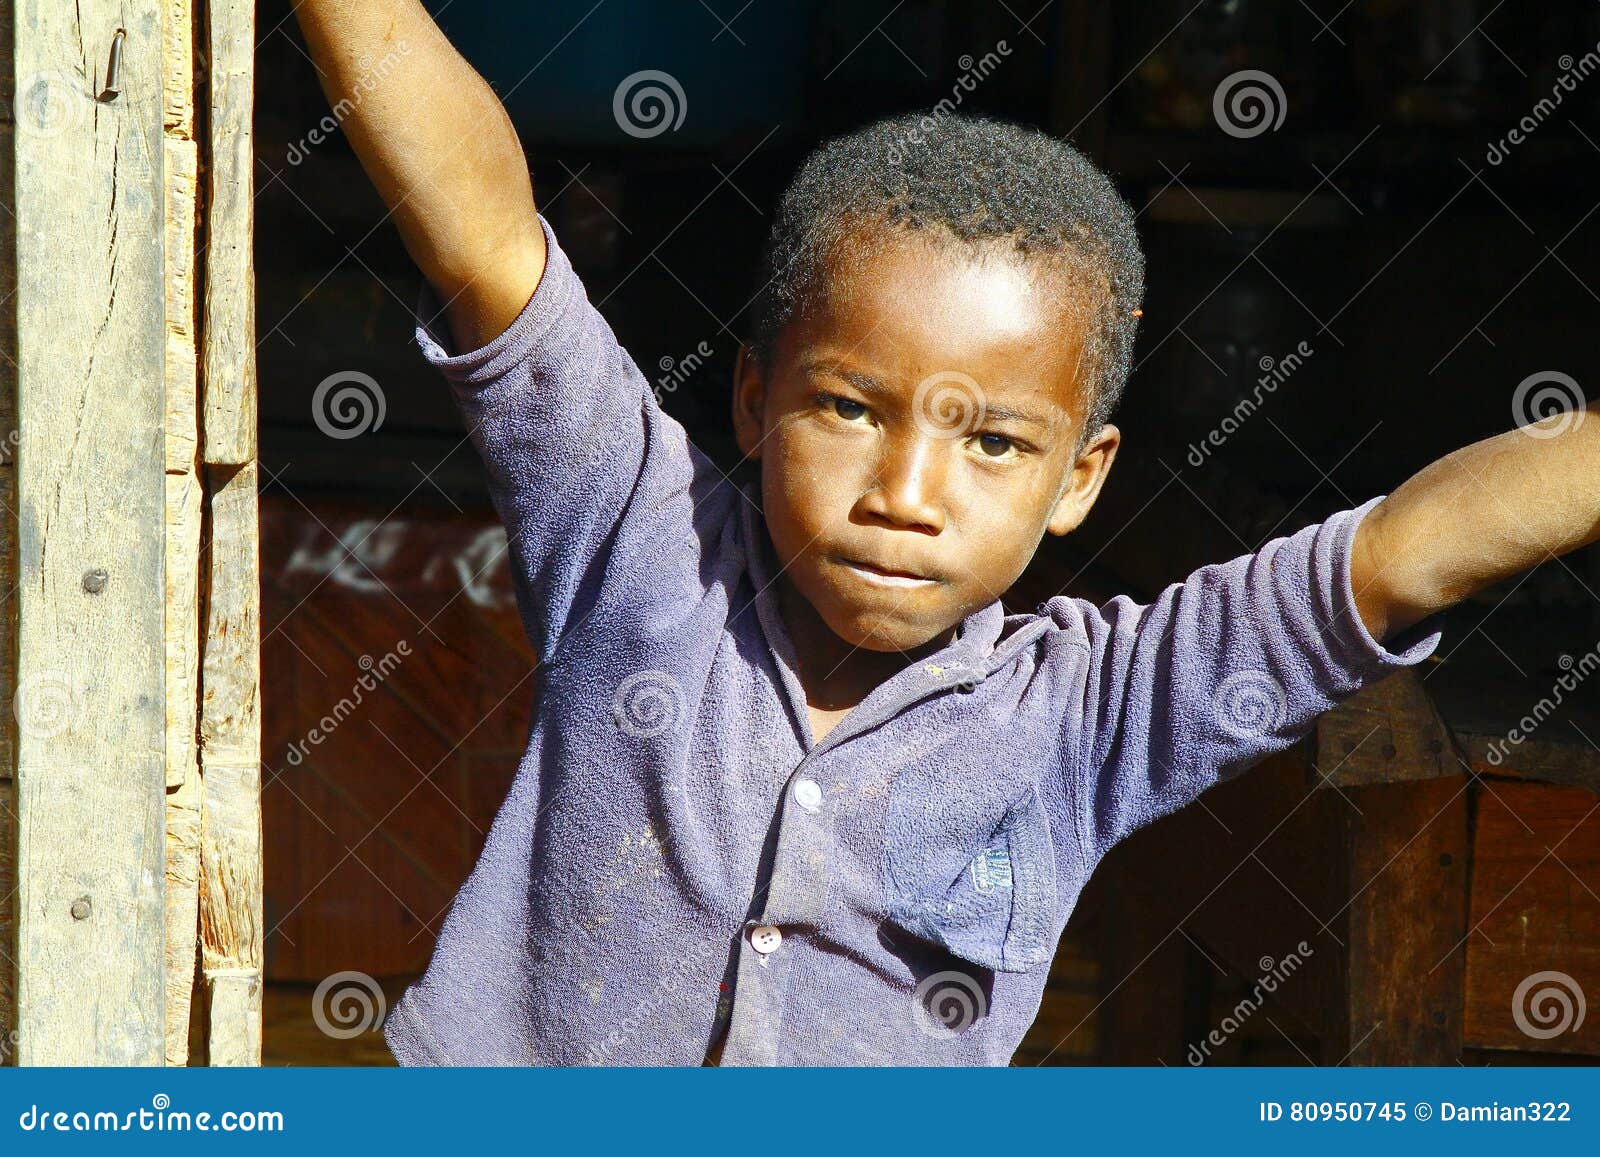 African Boy in Malgasy Village Editorial Image - Image of childhood ...